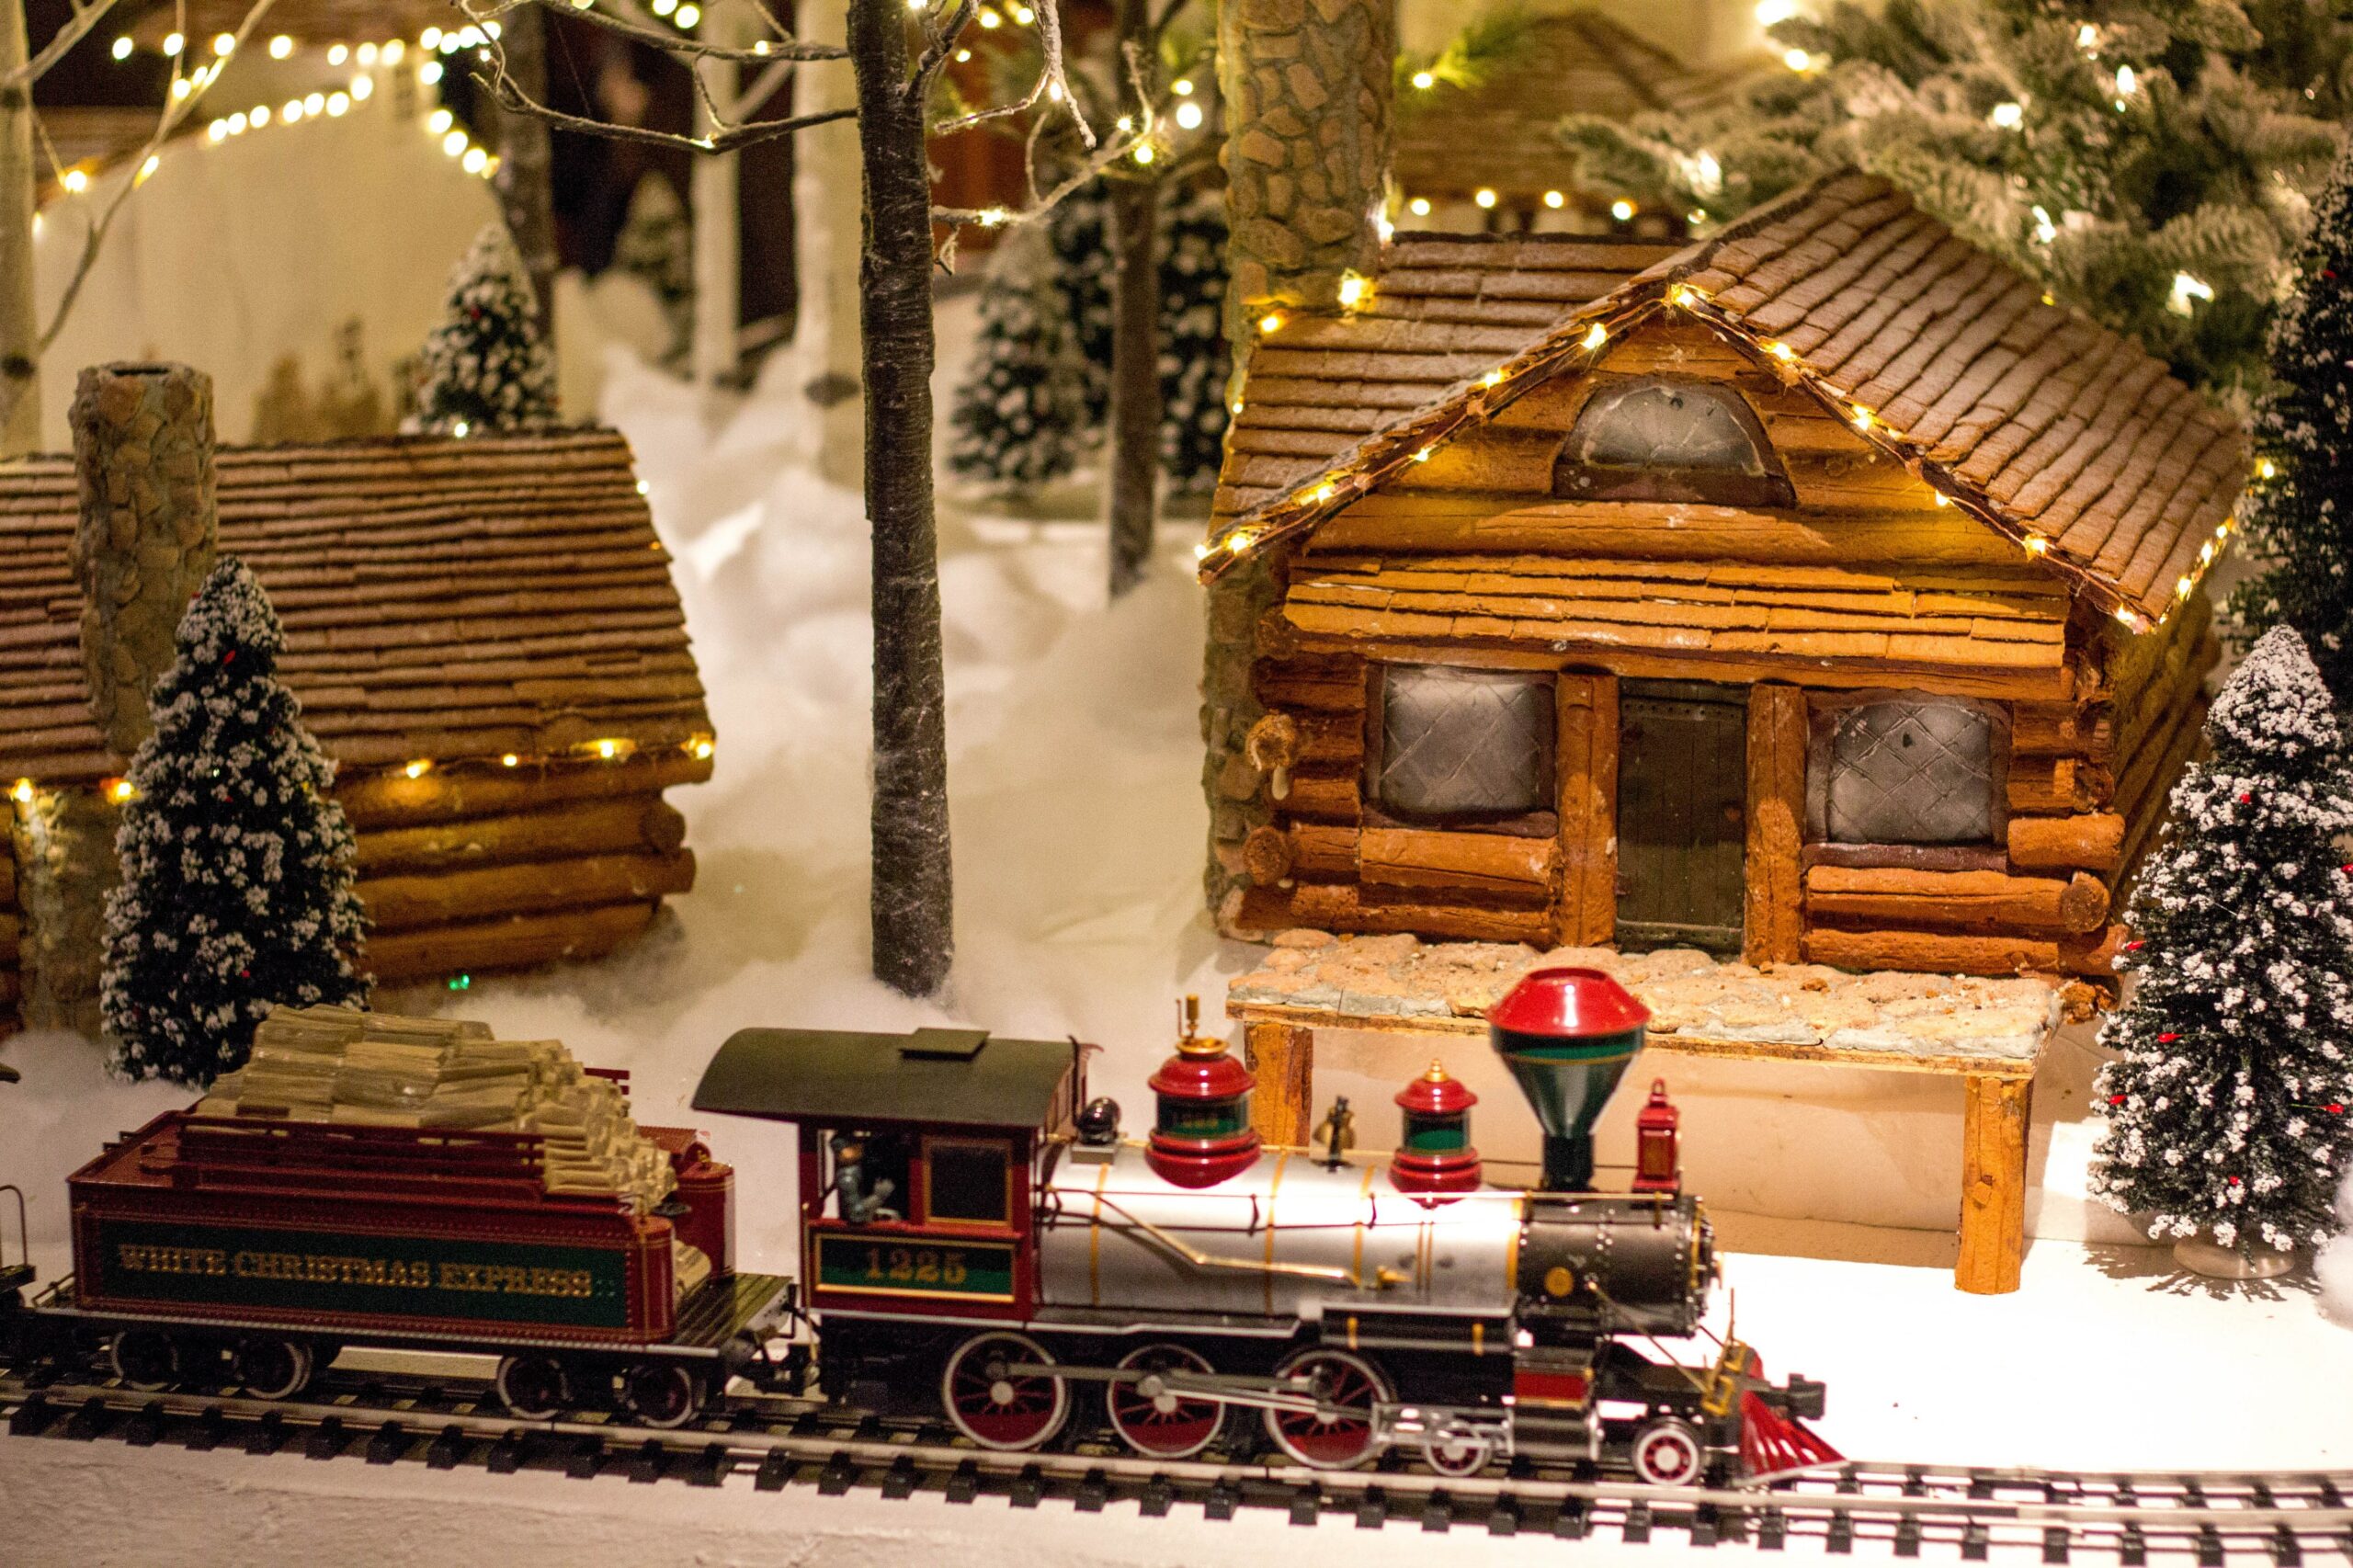 Why We Love Christmas: Exploring the Joy and Traditions of the Holiday Season